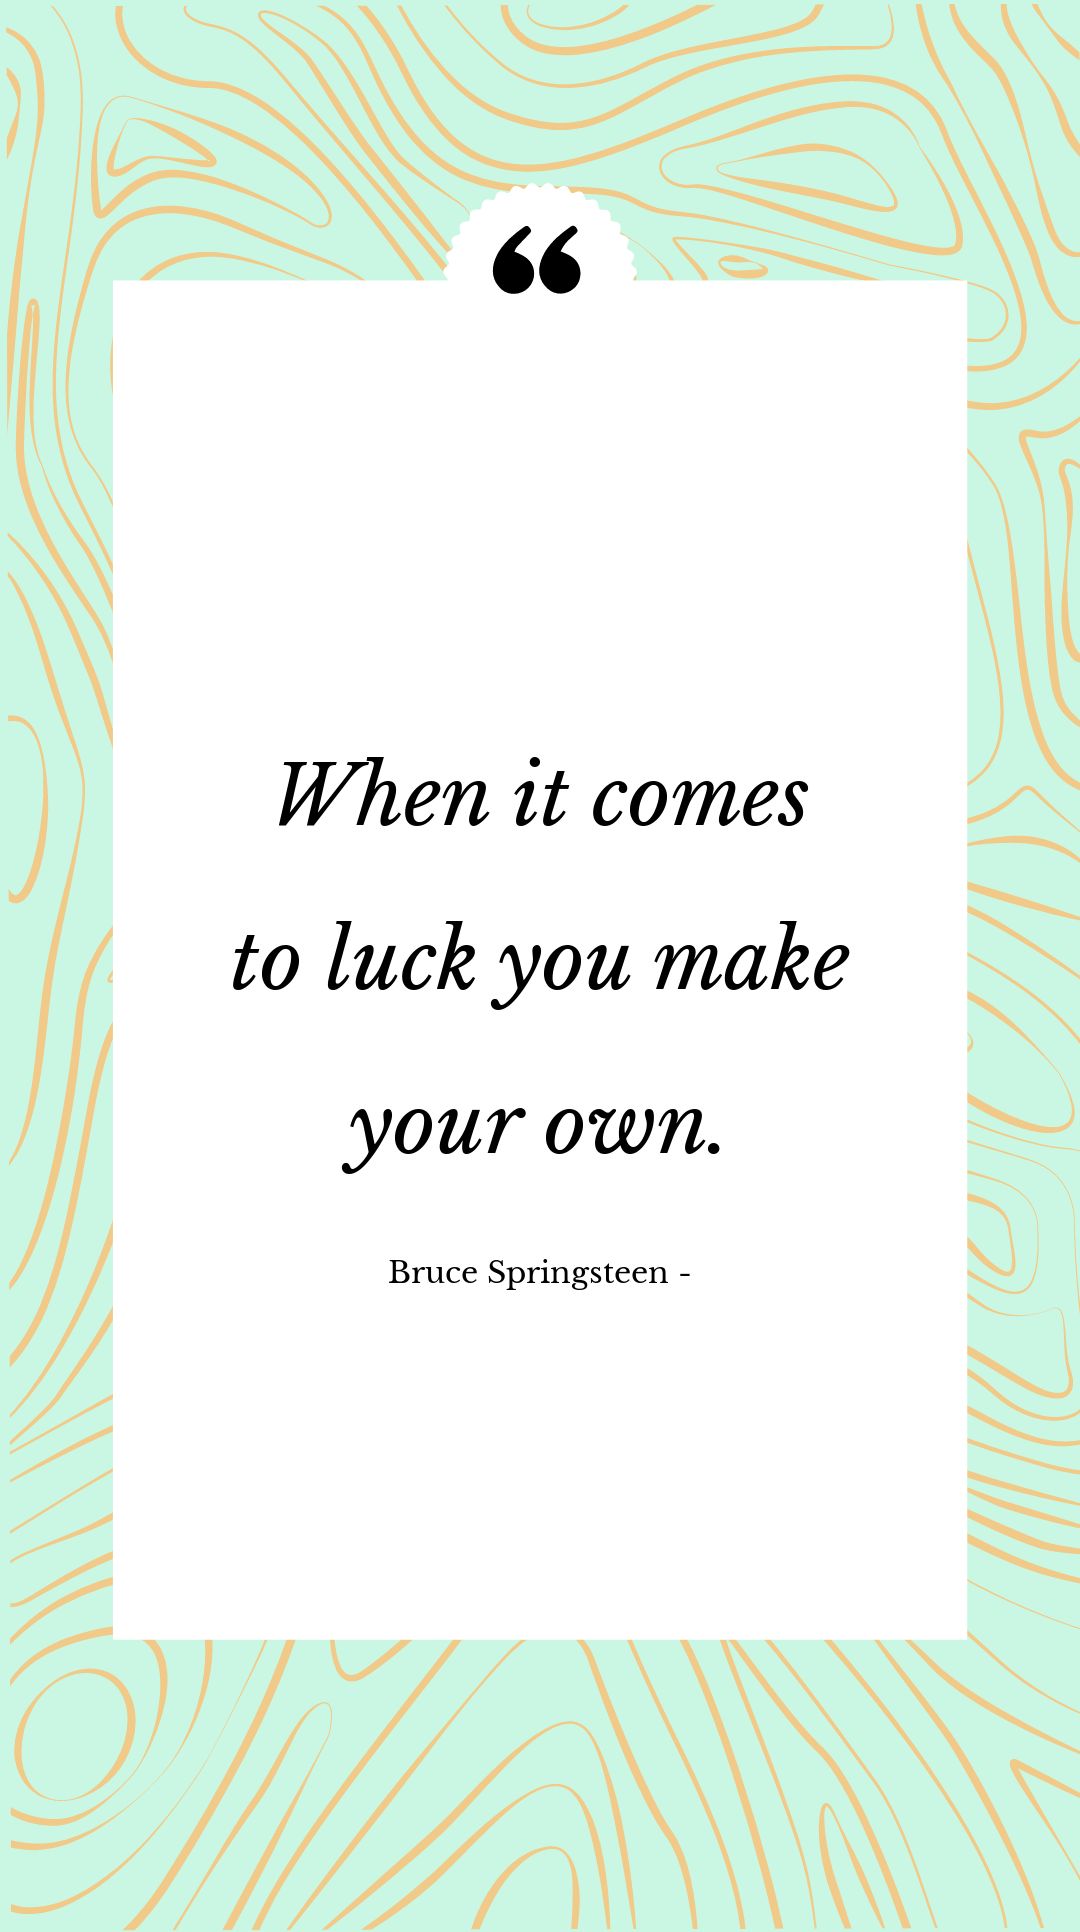 Bruce Springsteen - When it comes to luck you make your own.